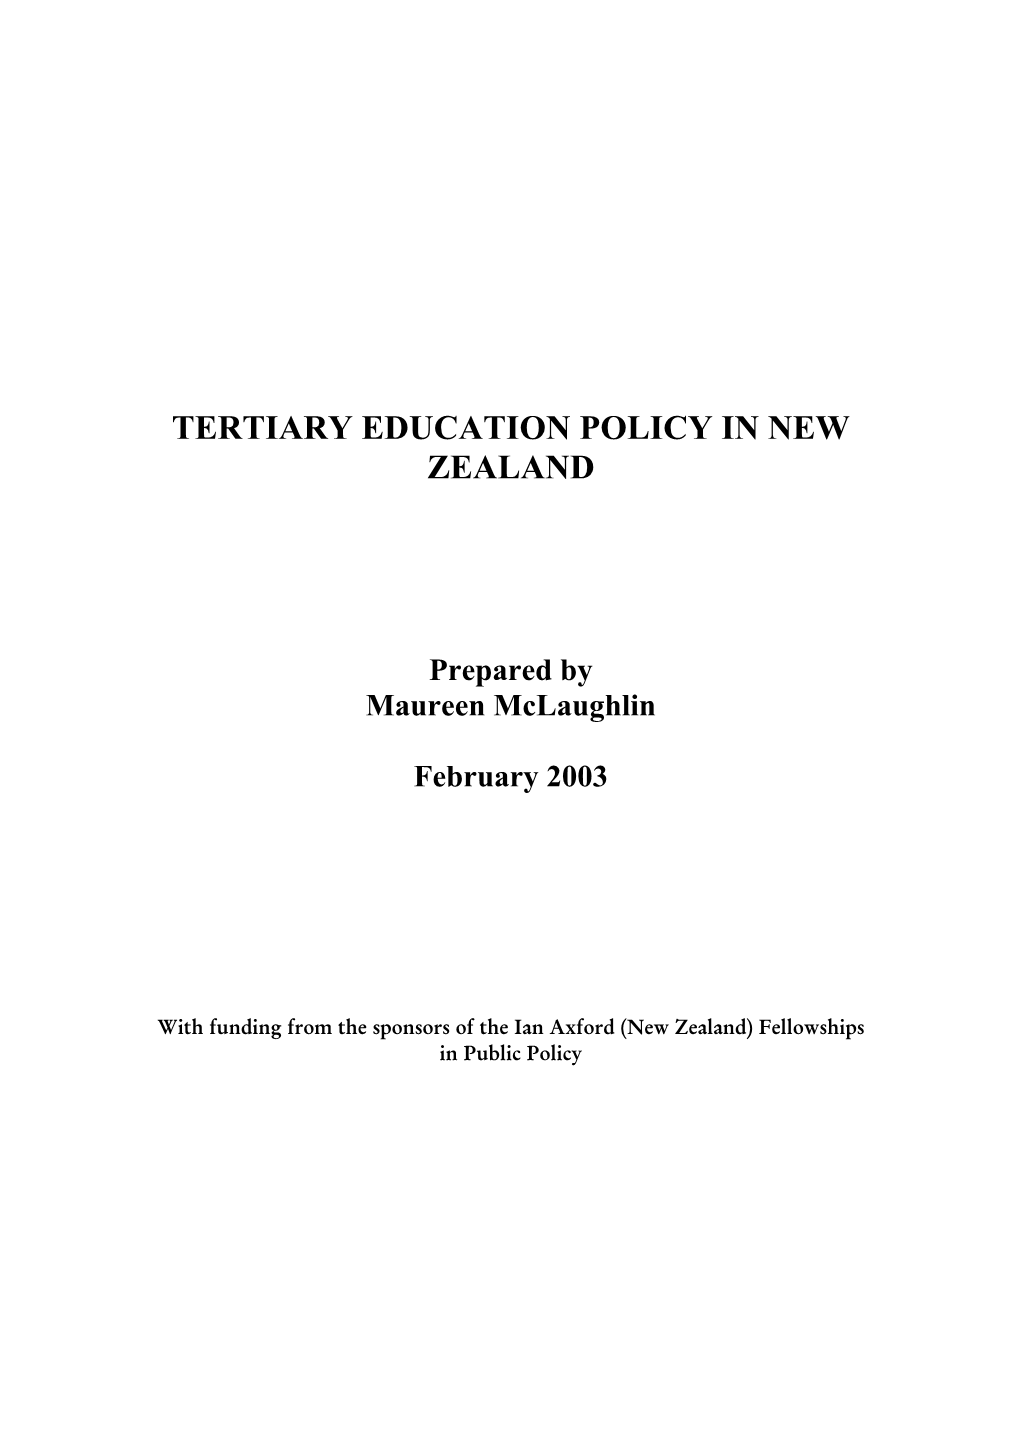 Tertiary Education Policy in New Zealand